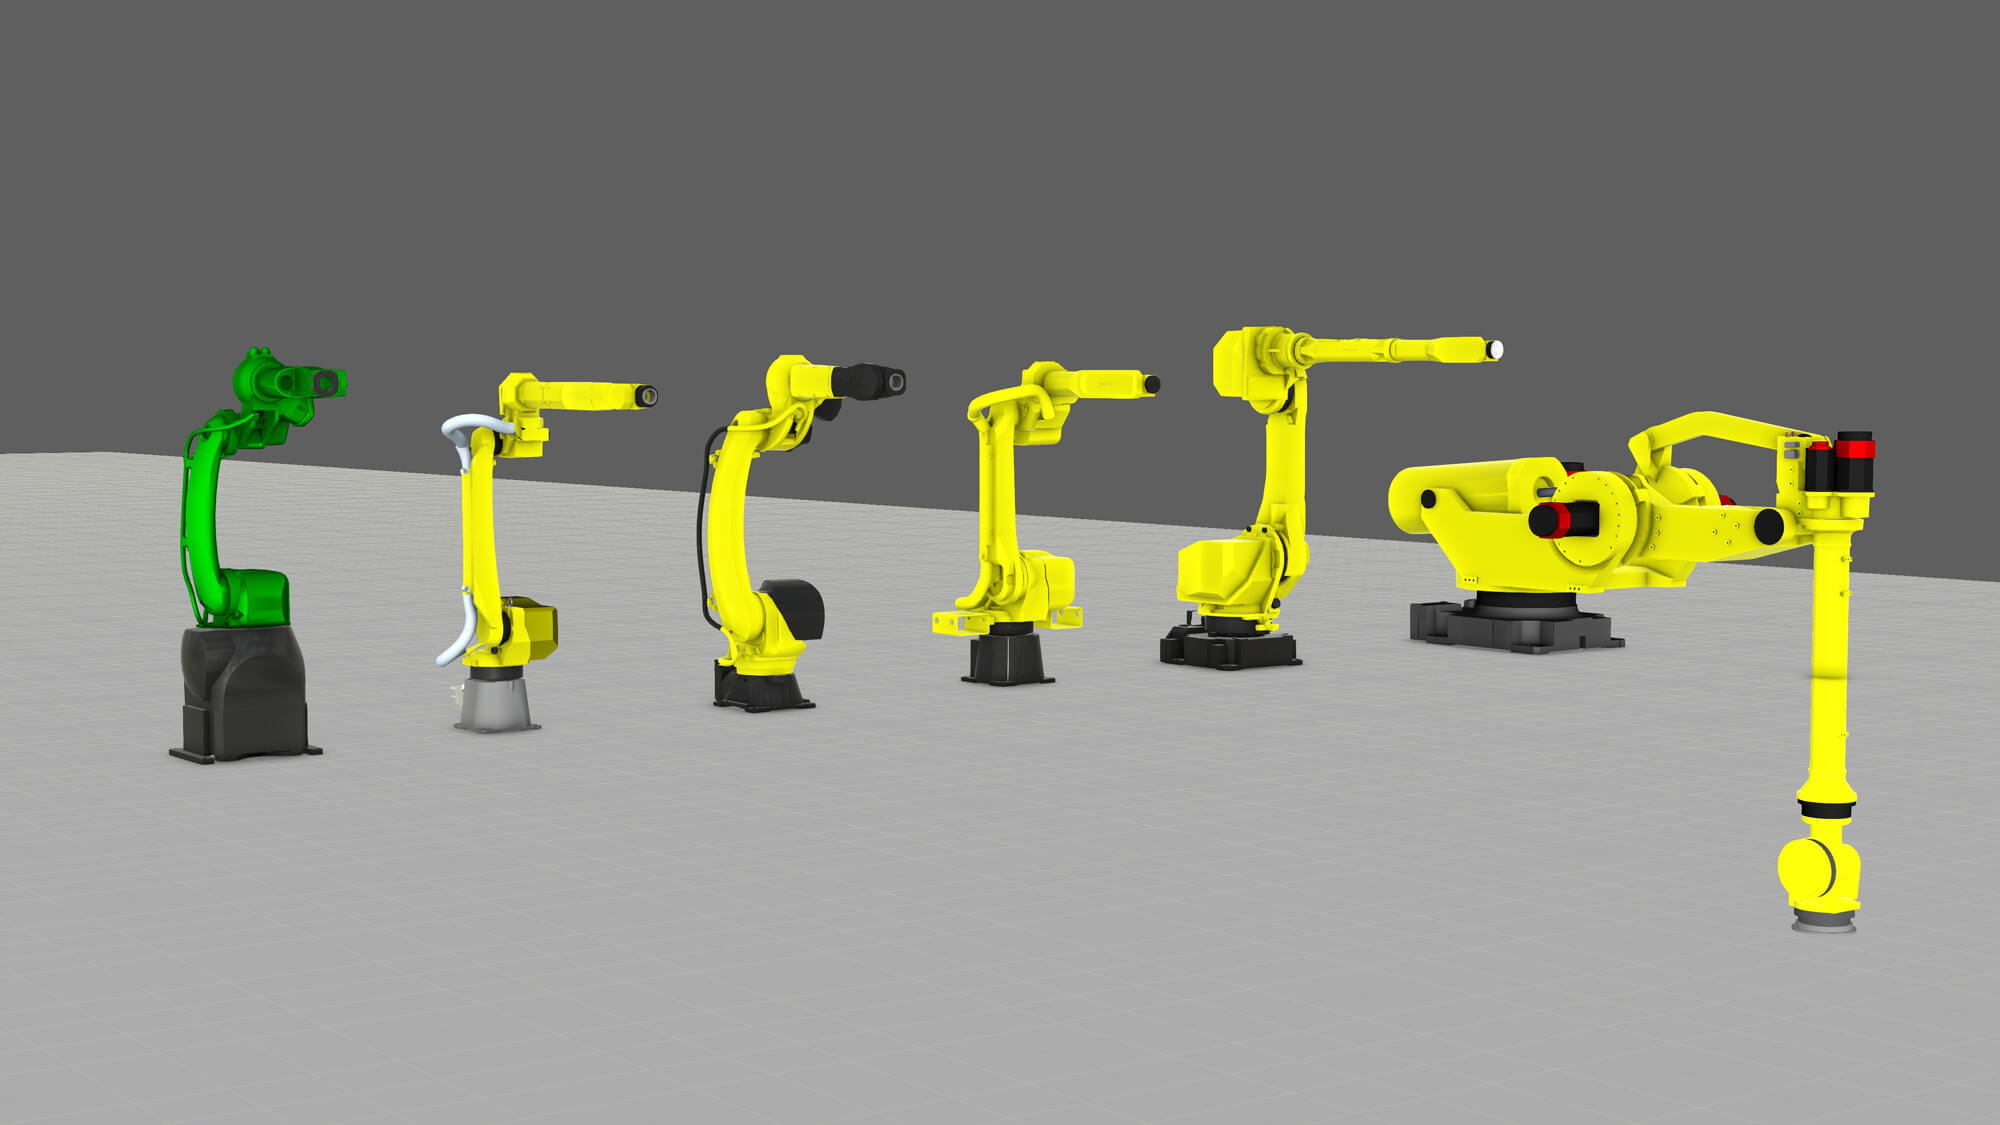 The new Fanuc component additions to Visual Components eCatalog in August 2019